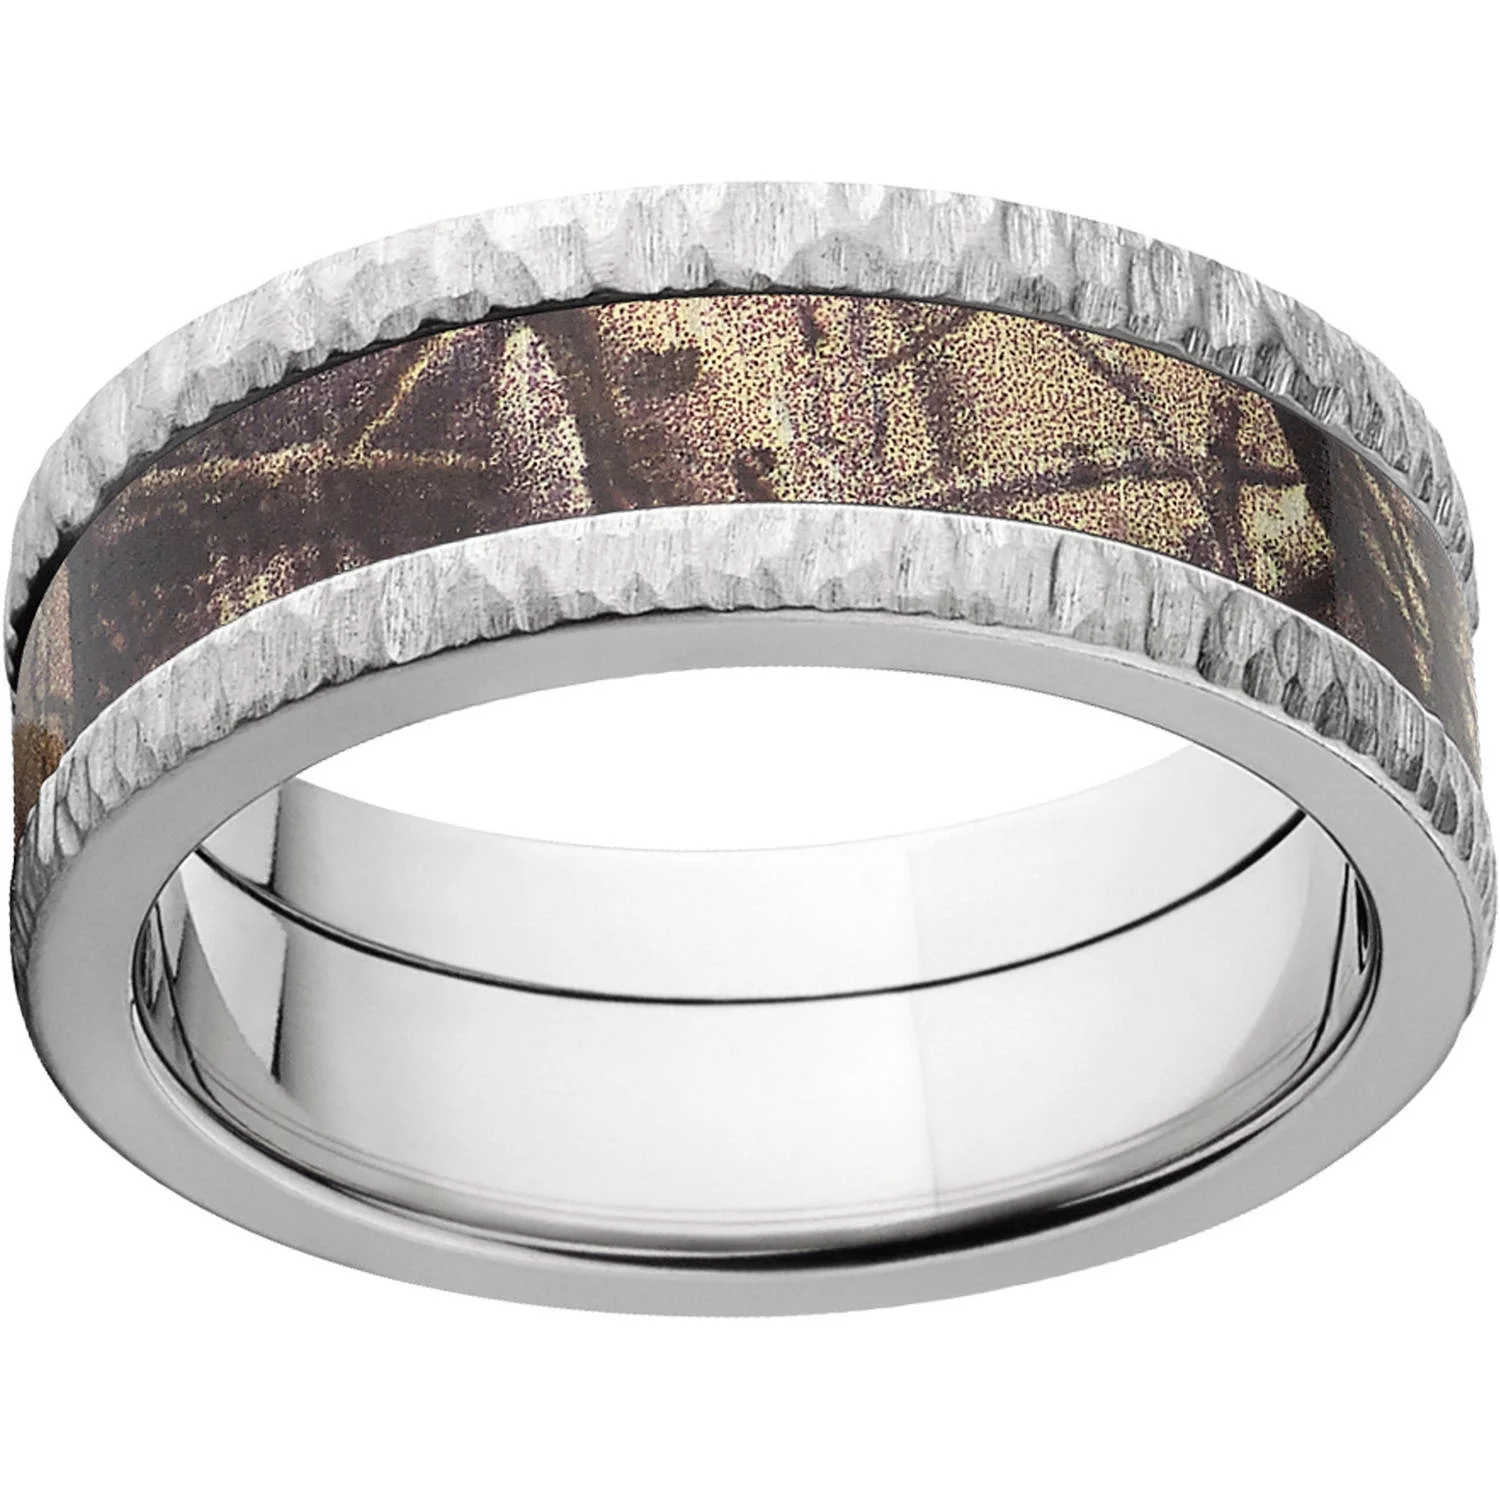 AP Men's Camo 8mm Stainless Steel Wedding Band with Tree Bark Edges and Deluxe Comfort Fit